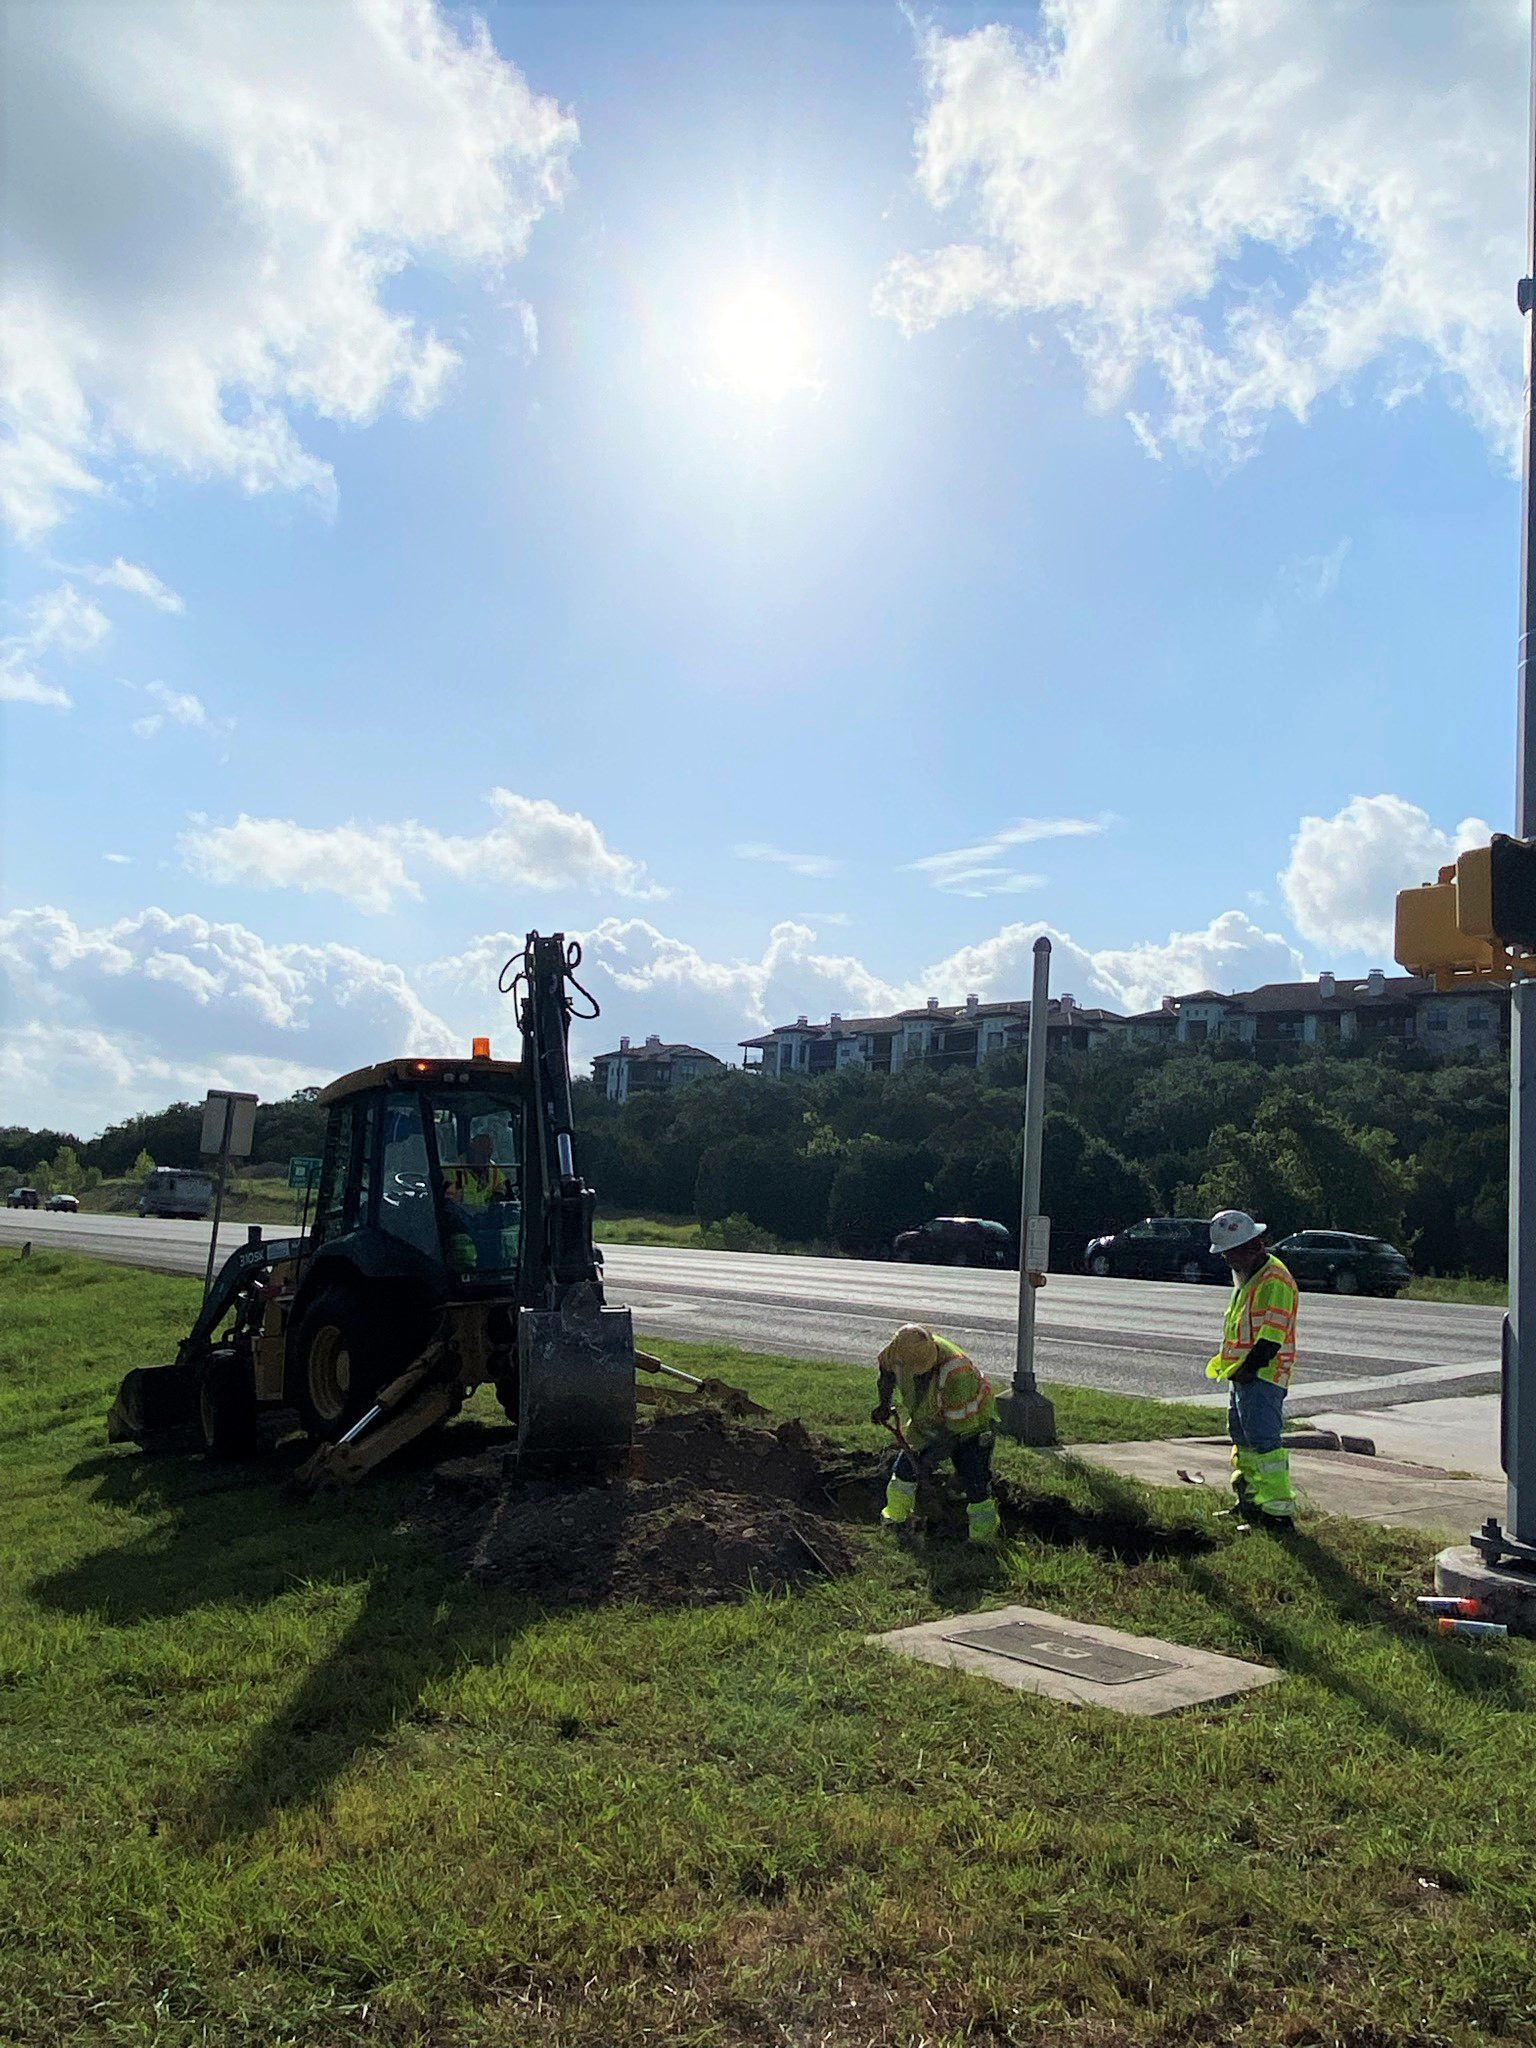 Crews perform utility investigations near Convict Hill Road in advance of project-related utility relocations beginning later this year, August 2021